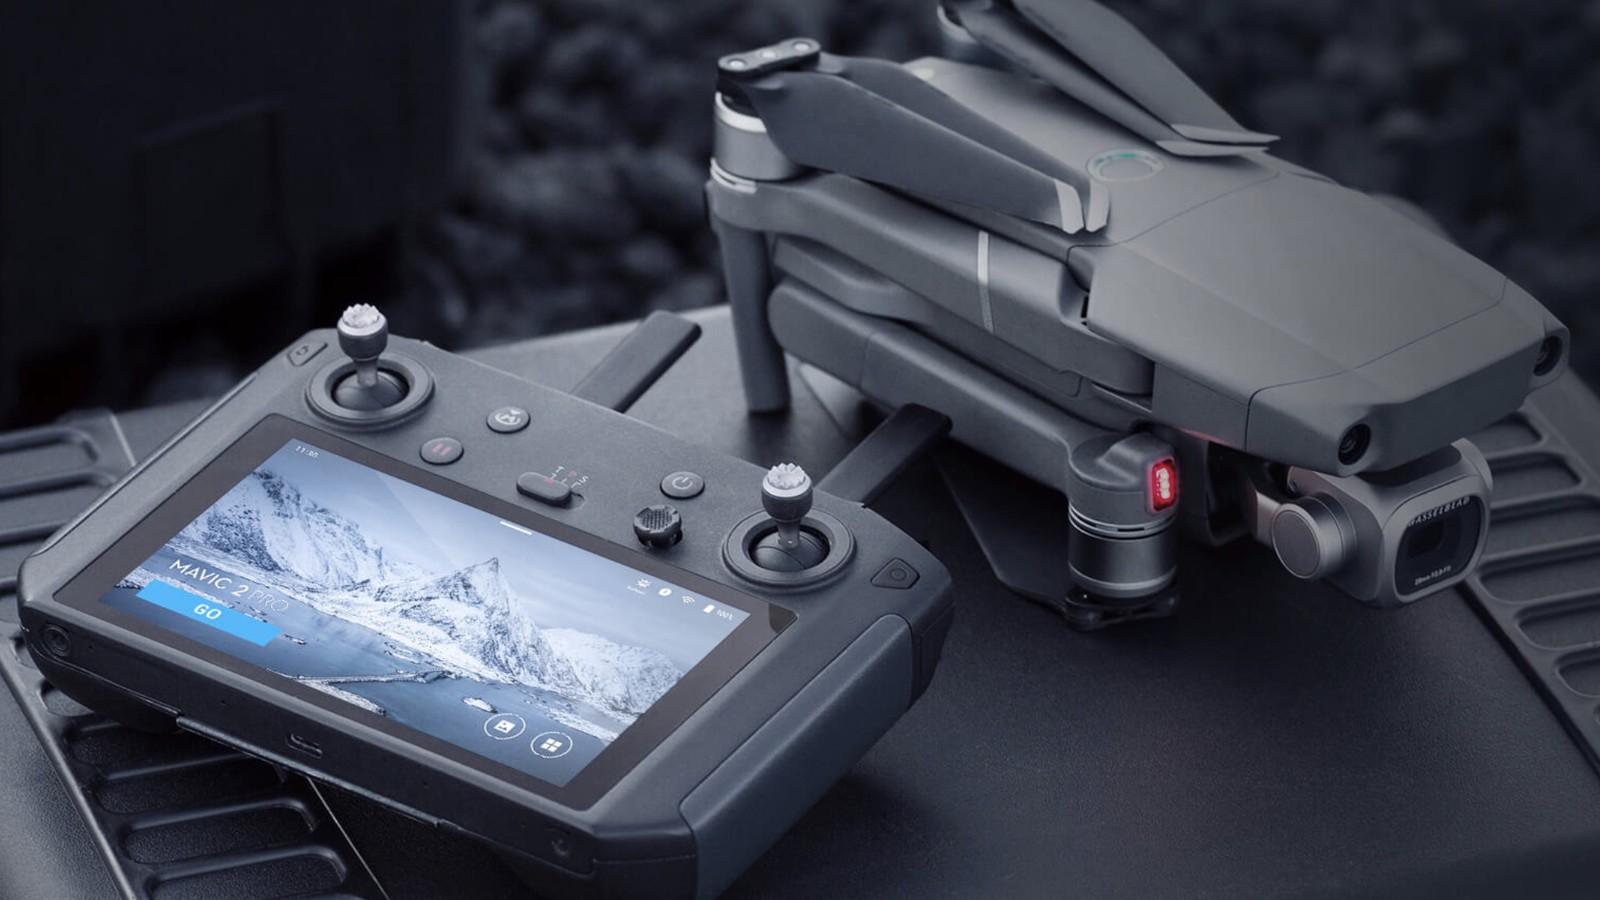 Which drones does the DJI Smart Controller support?